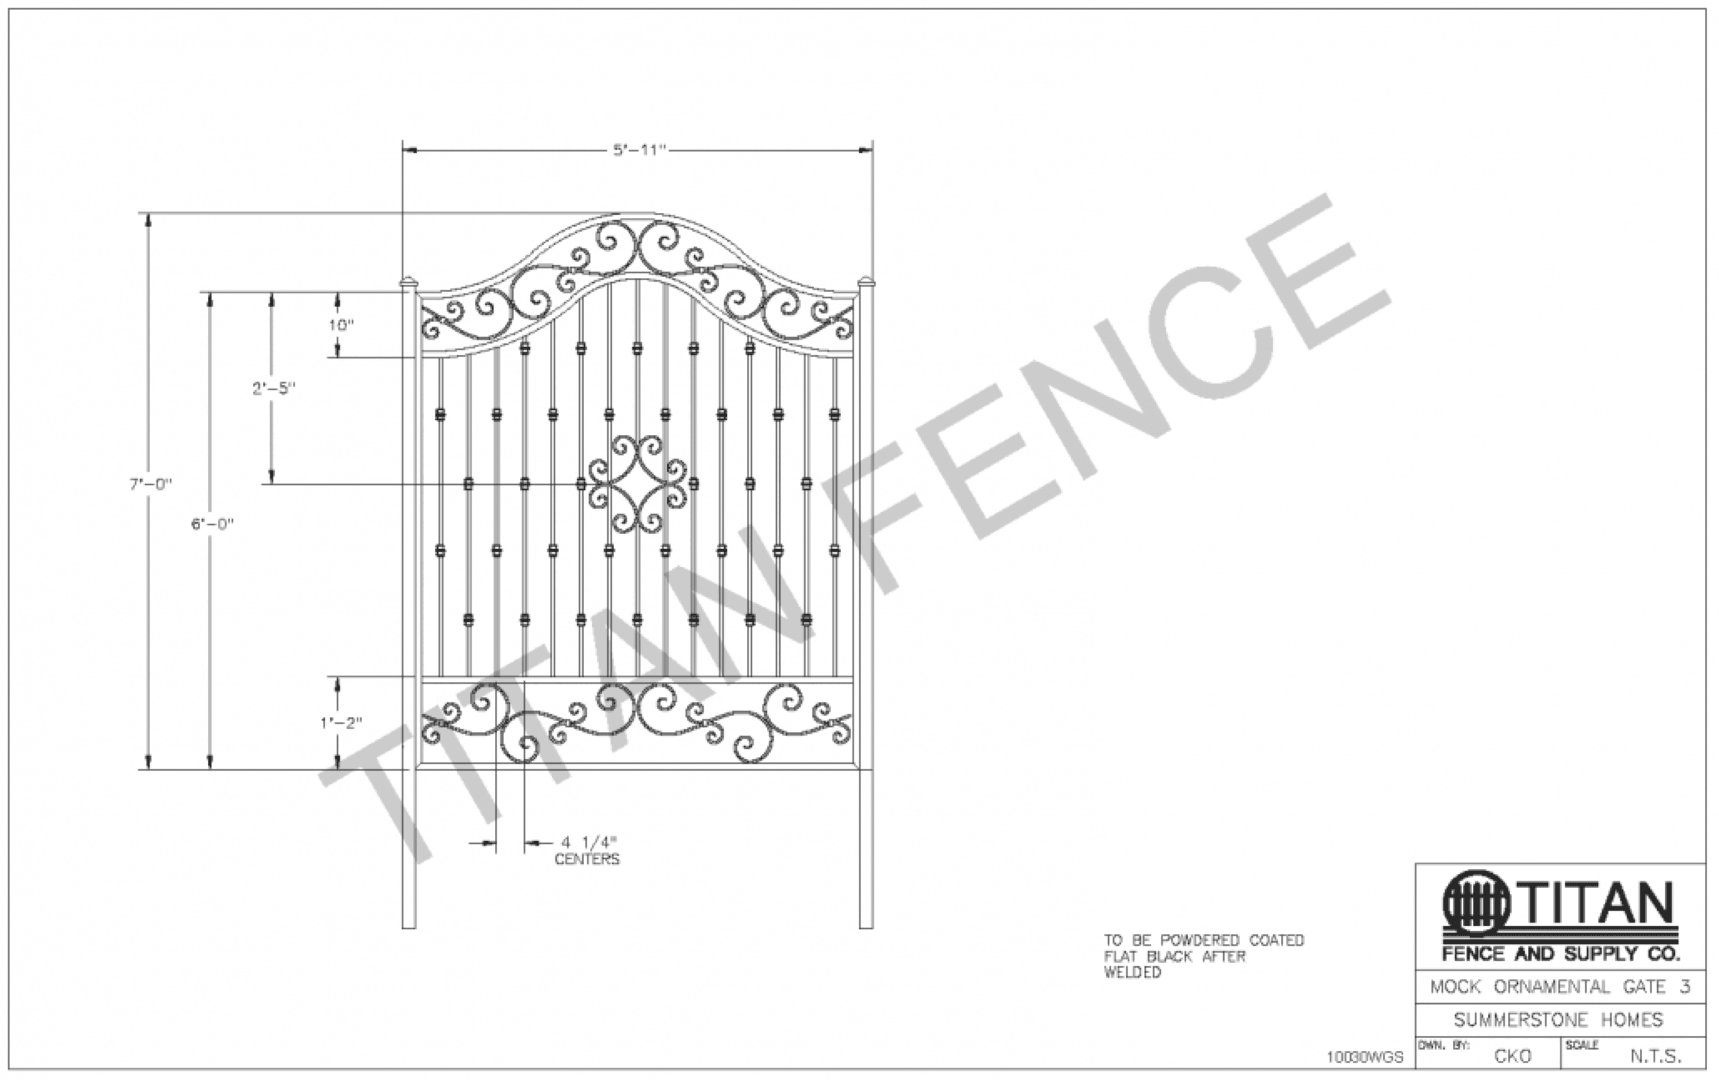 cad Walk gate drawings in North DFW Area